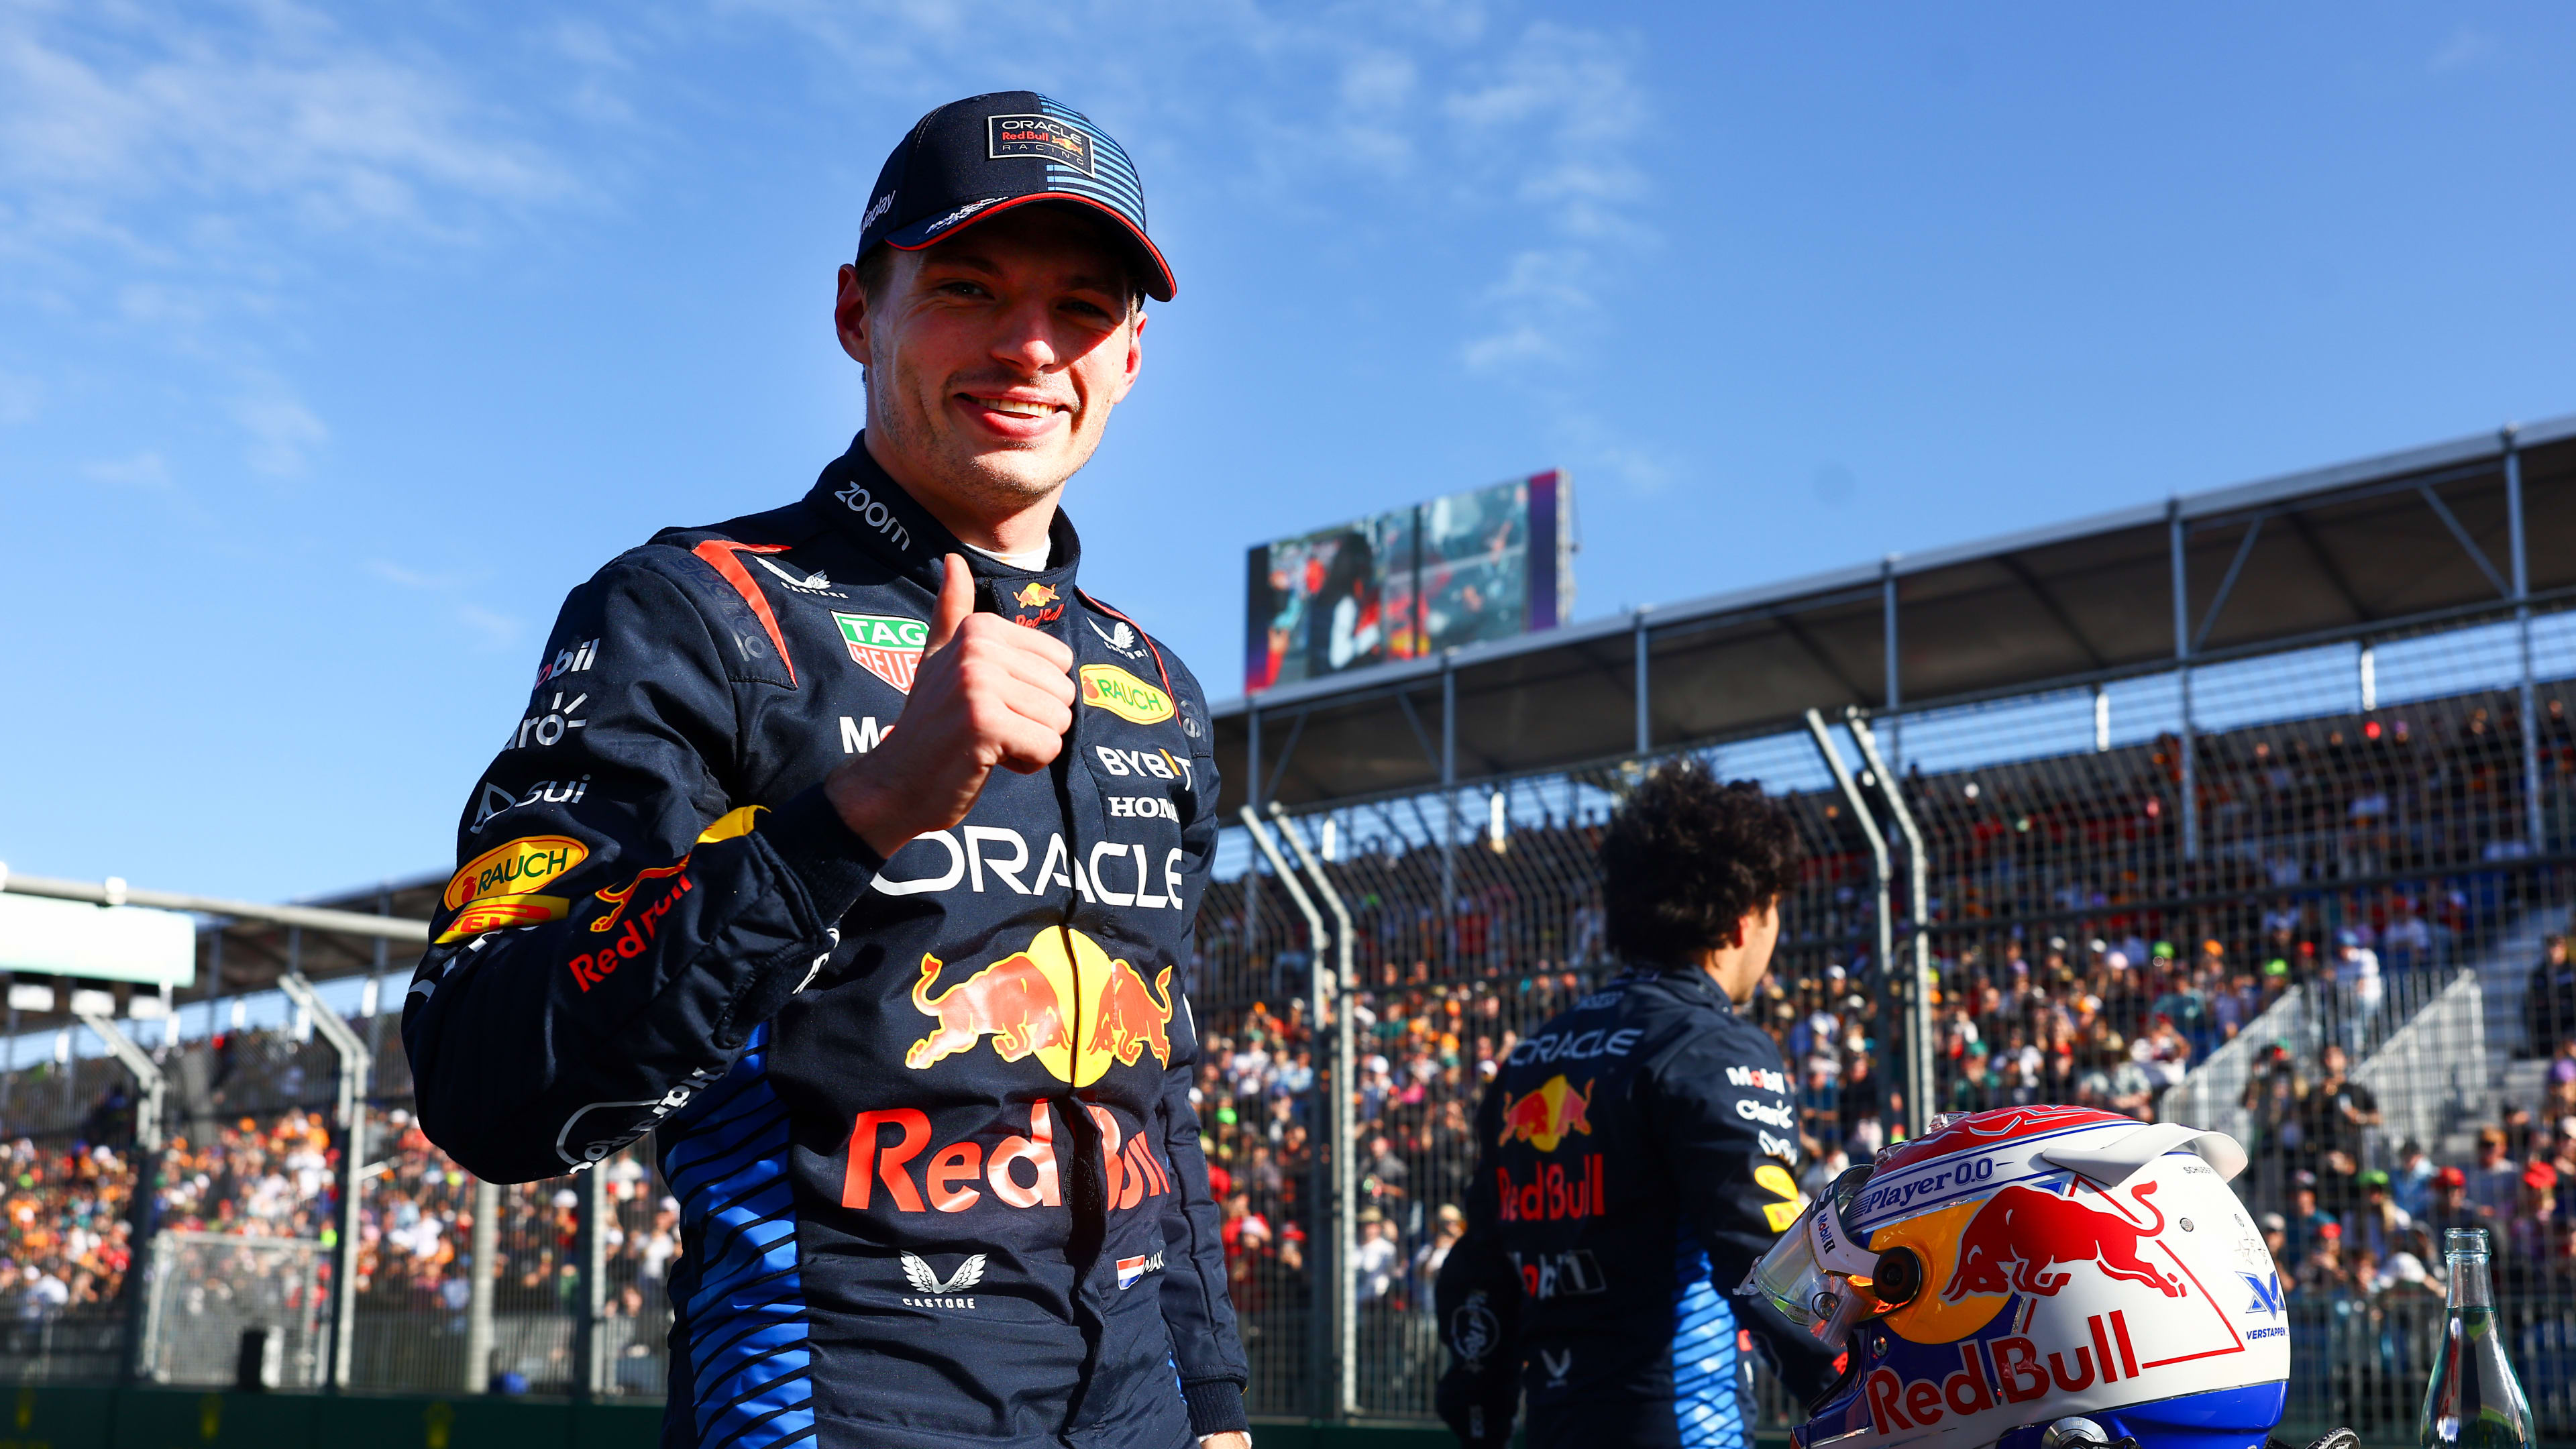 Max Verstappen surges to pole position for the Aus